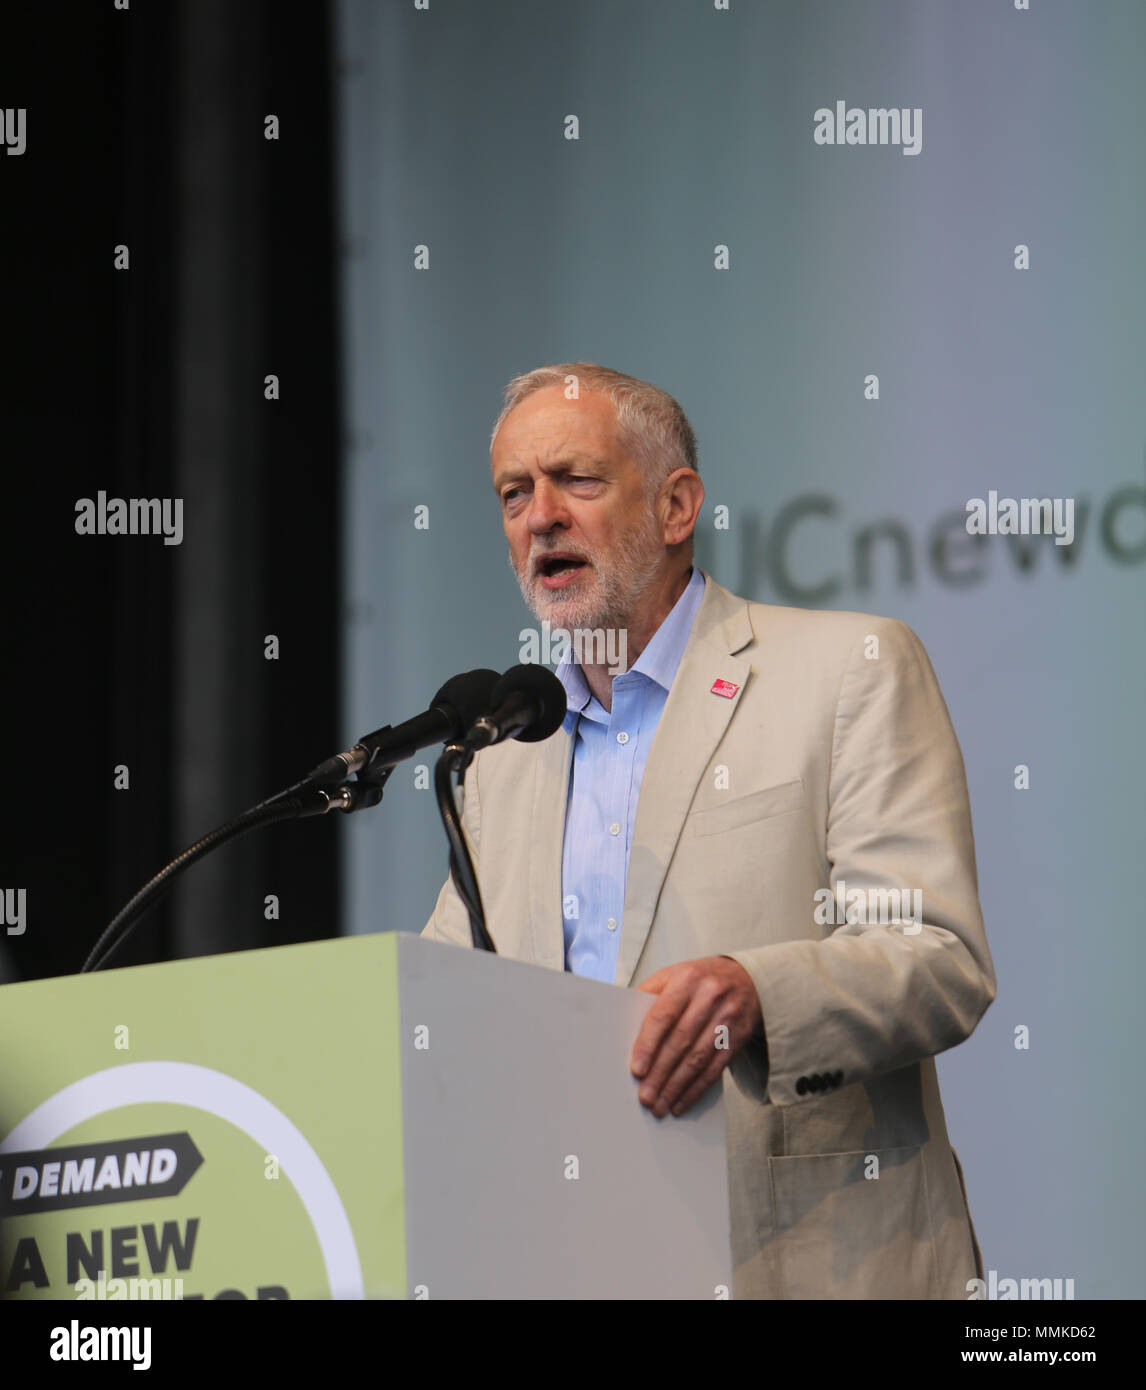 London UK 12 May 2018  Jeremy Corbyn Leader of the Labour Party and Leader of the Opposition since 2015. He has been the Member of Parliament for Islington North since 1983 speaking at the Trades Union Congress (the umbrella organisation of Trade Unions) who called a national demonstration under the slogan of 'A New Deal for Working People. Demanding  a real Living Wage for all workers, collective bargaining and union rights and an end to the 'gig-economy' .@Paul Quezada-Neiman/Alamy Live News Stock Photo